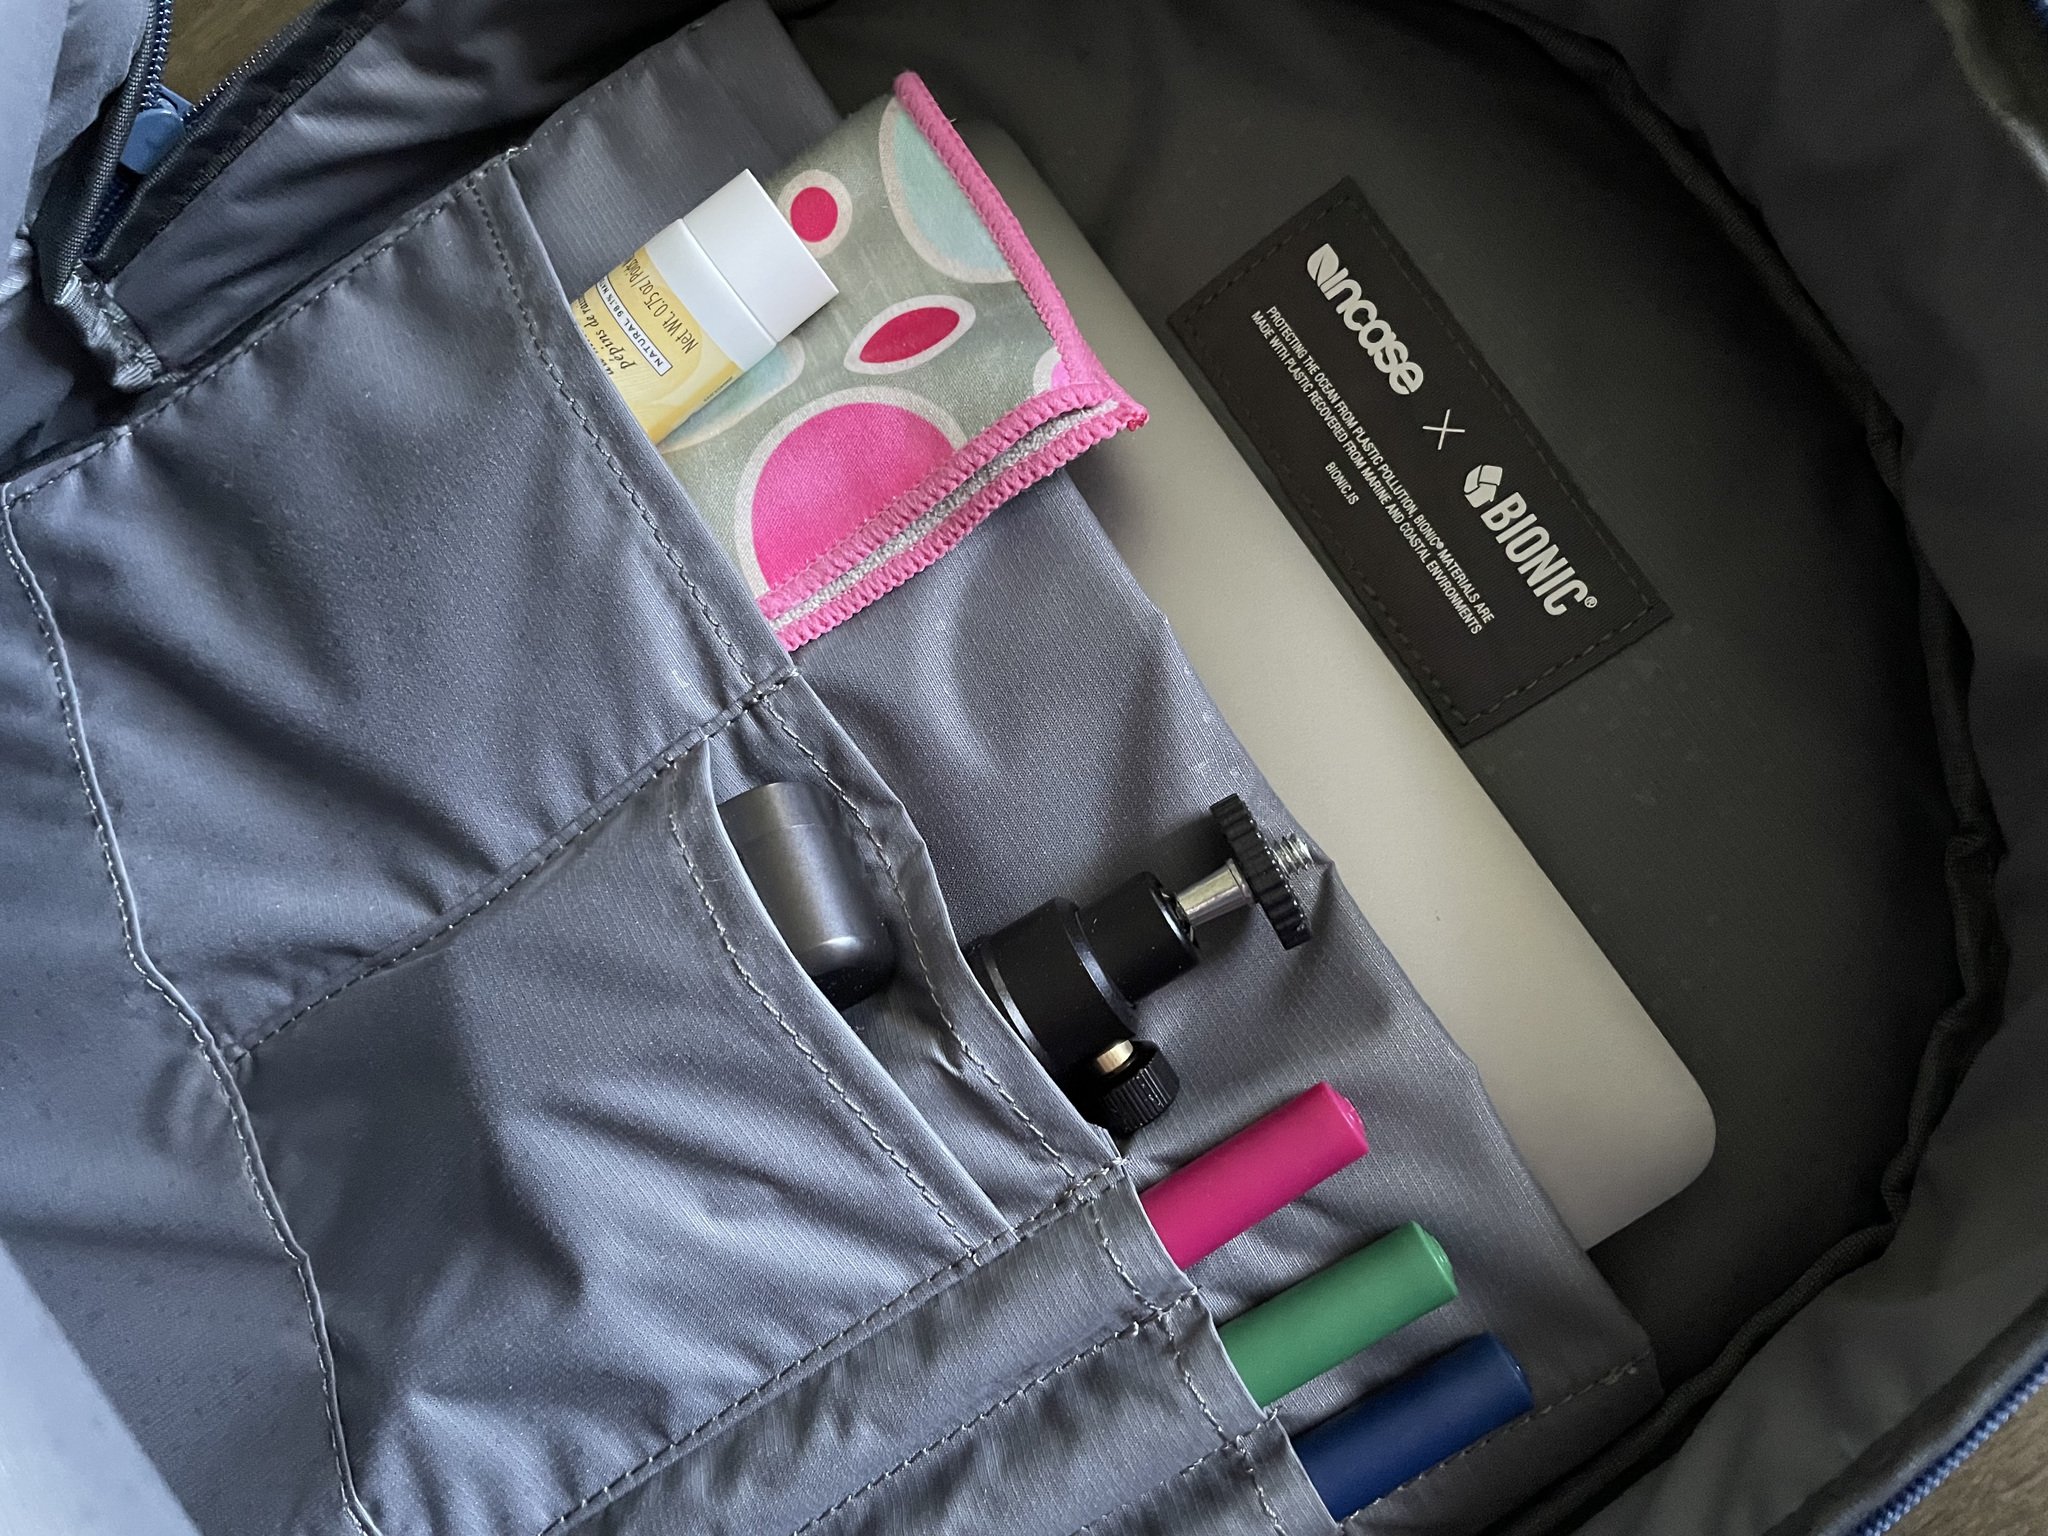 Incase Commuter Backpack With Bionic Lifestyle Inside